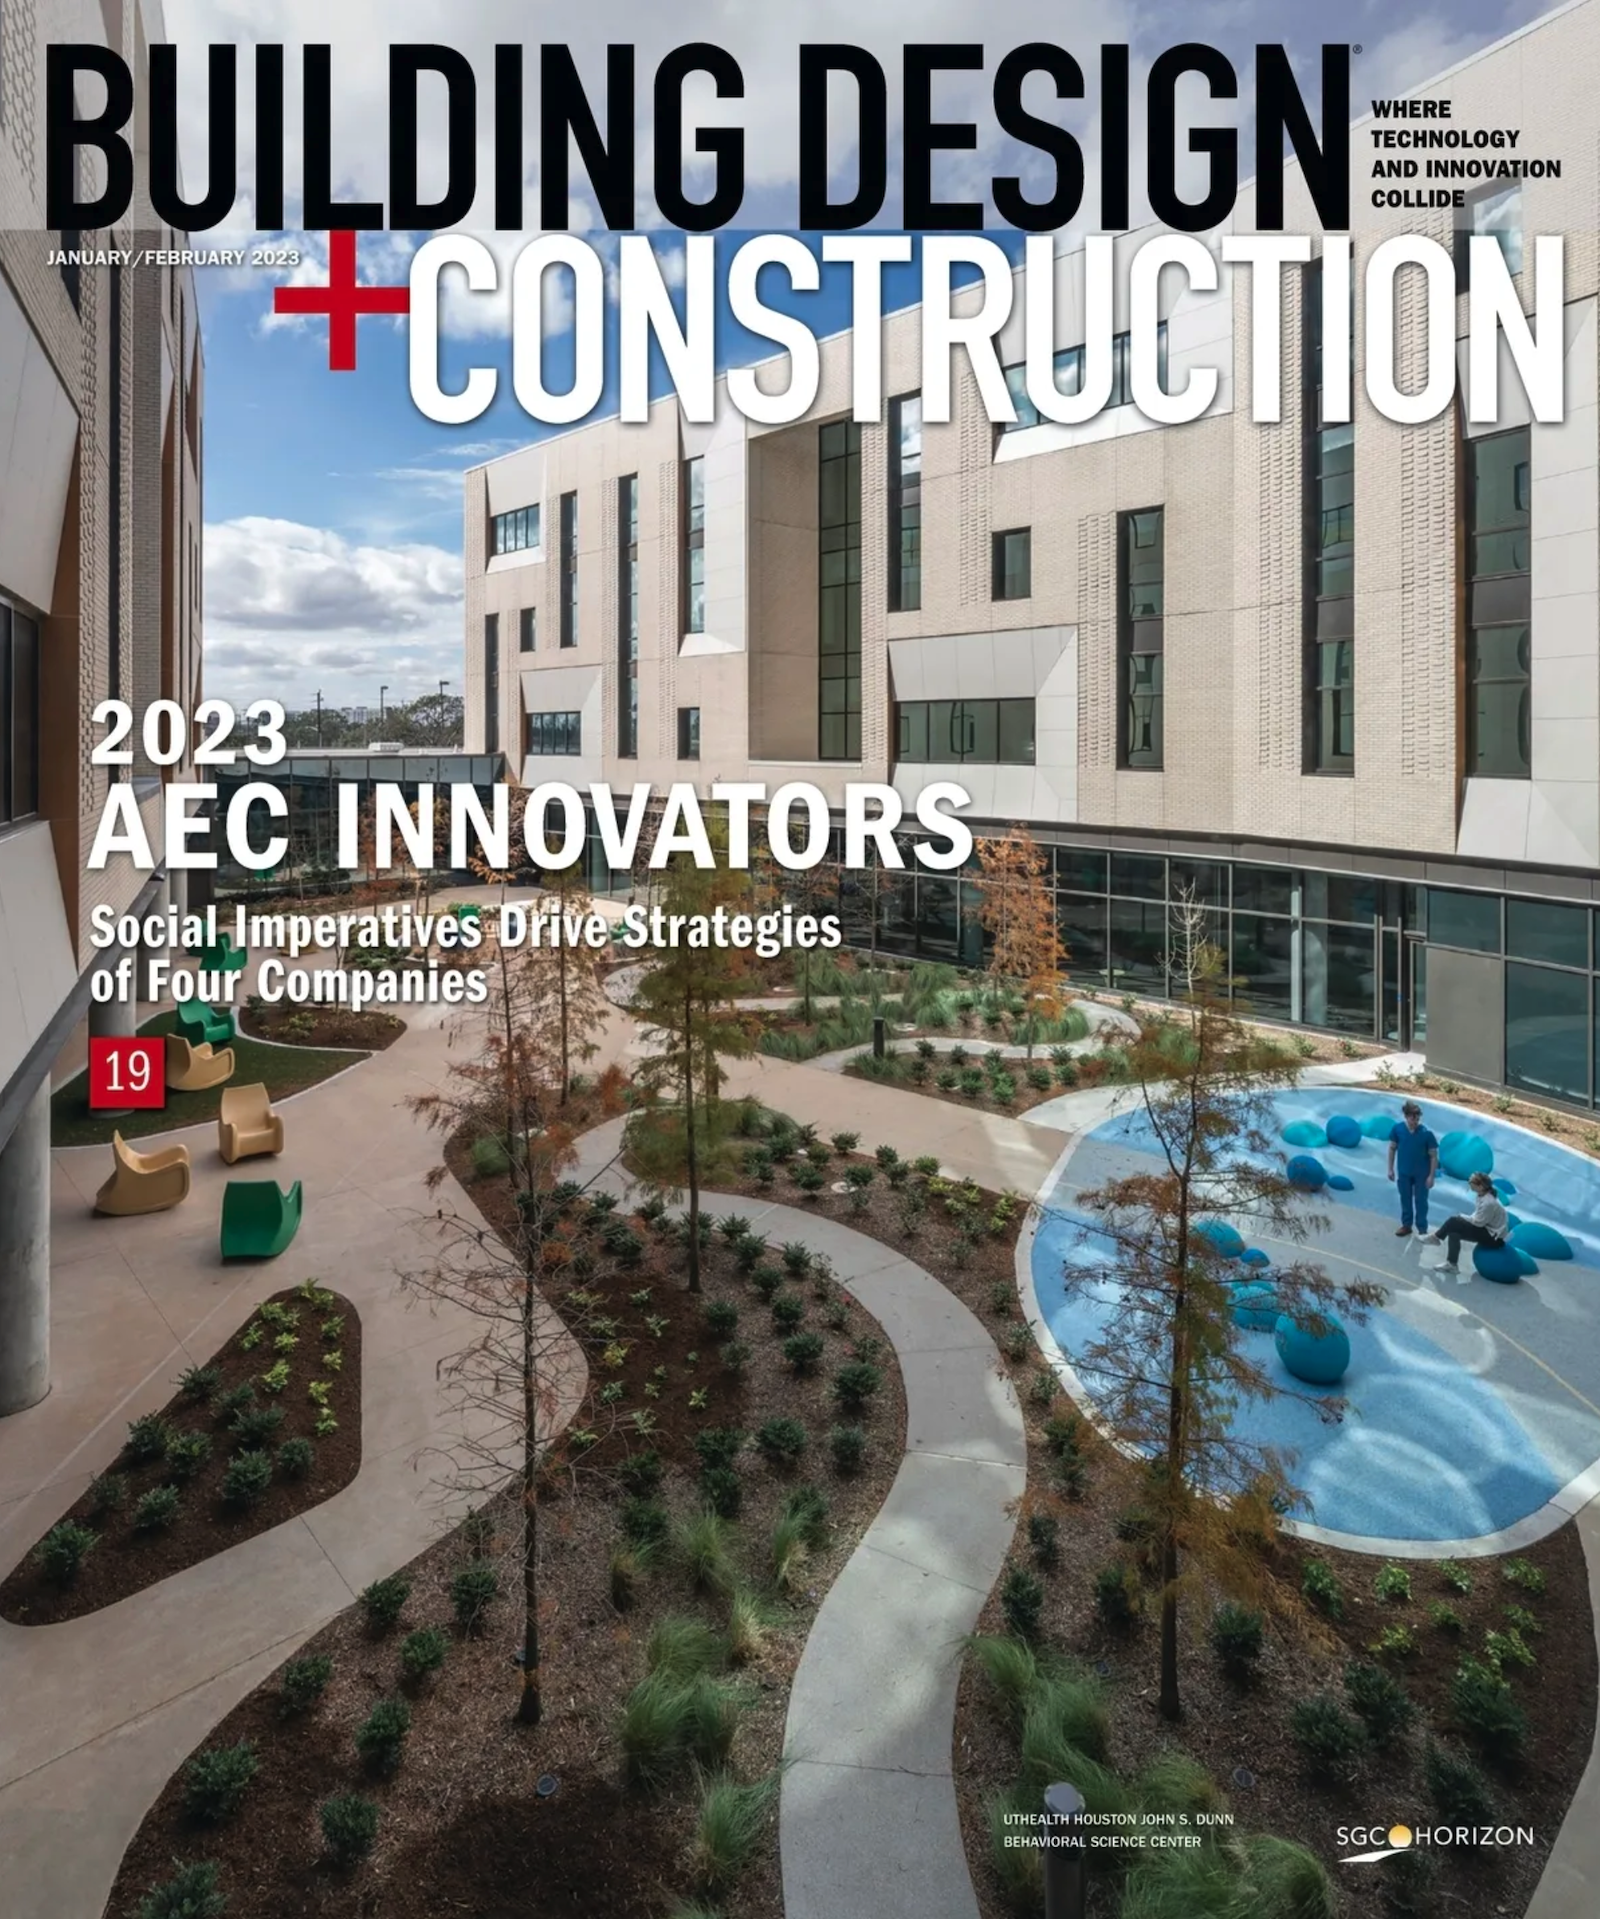 Building Design and Construction January February 2023 issue